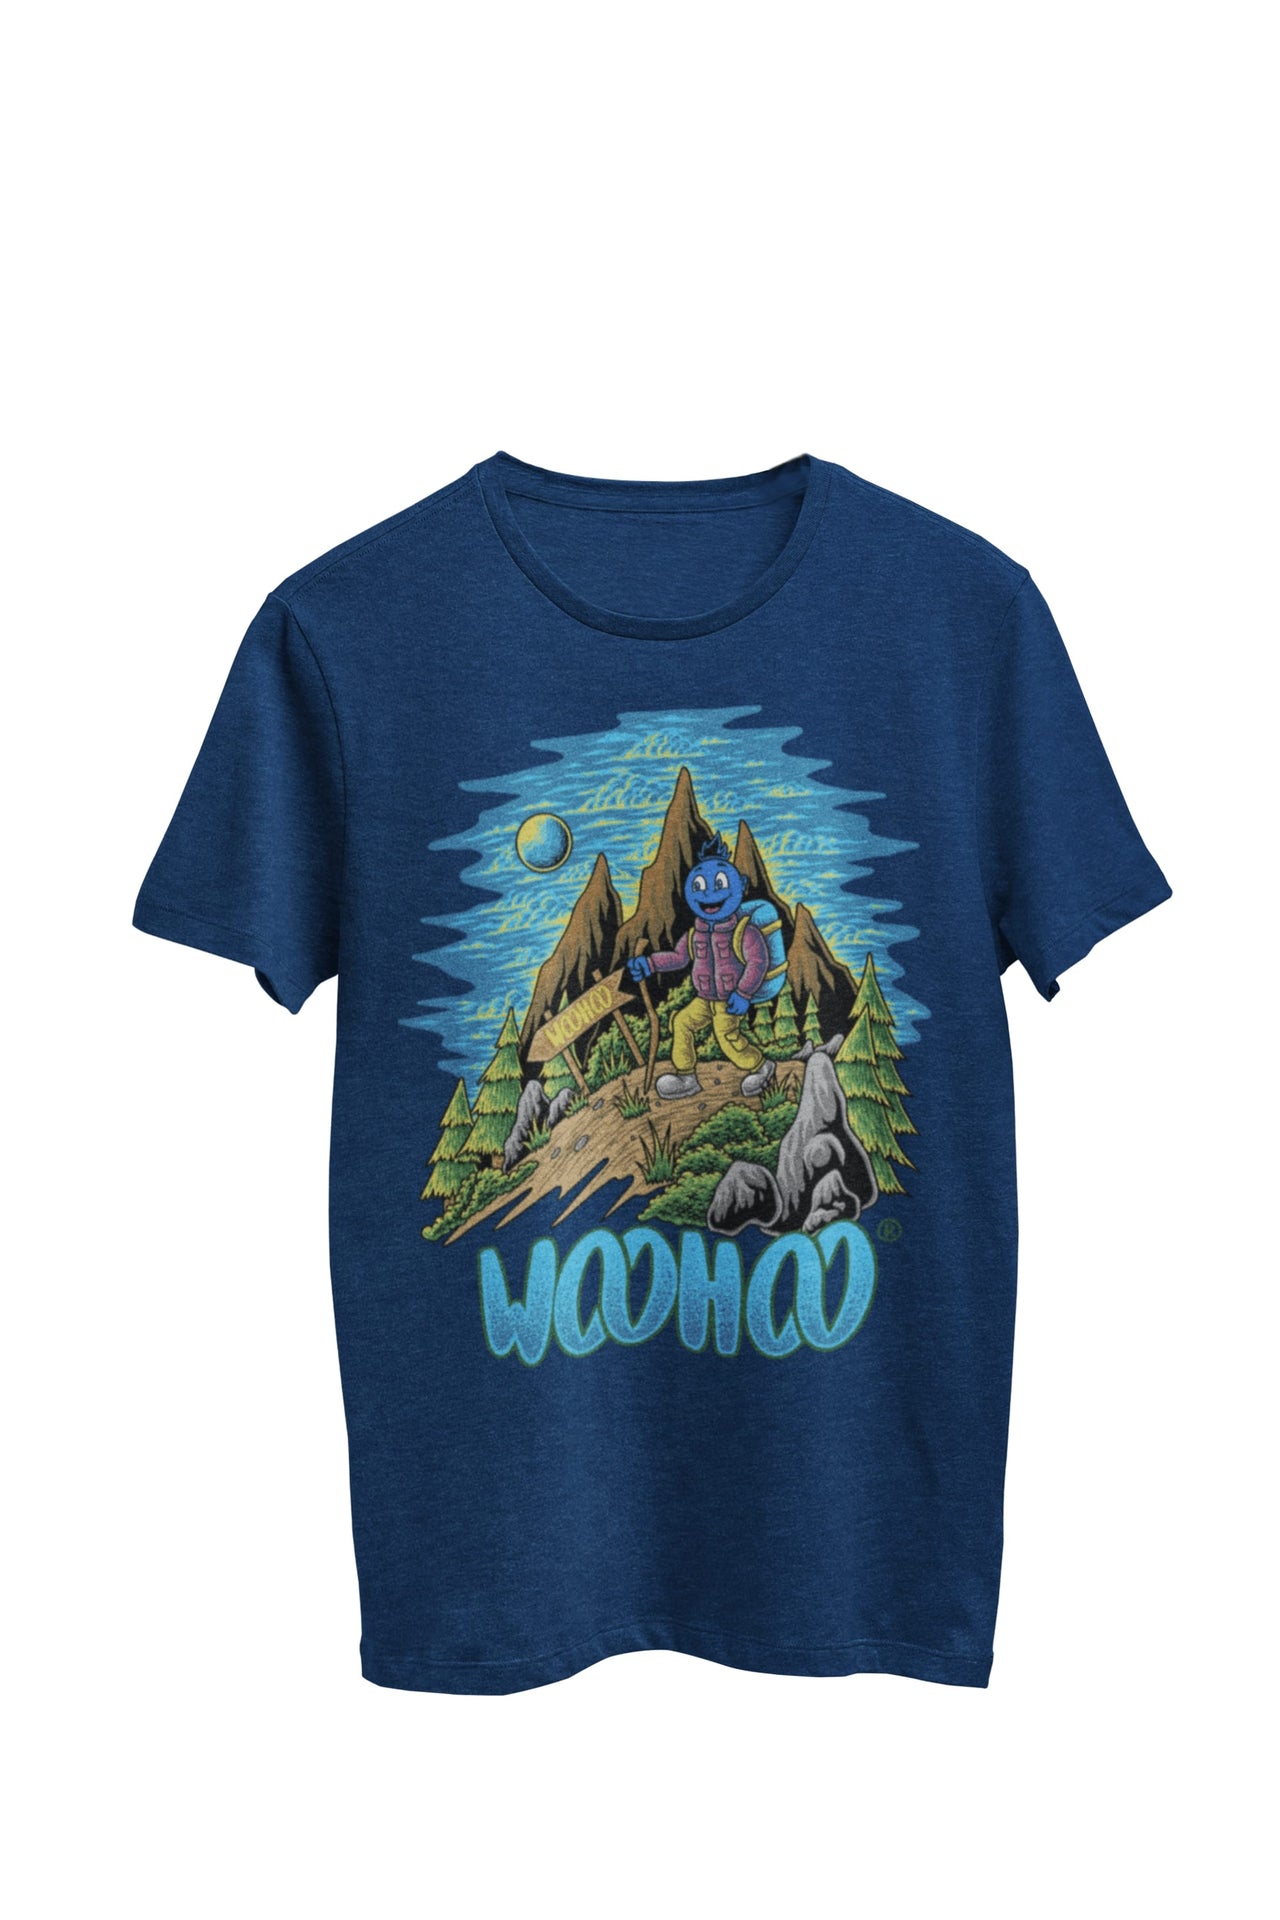 WooHooBerry relishing a winter hike through the natural landscape, outfitted in cozy winter attire while participating in outdoor sports. This navy T-shirt proudly bears the text 'WooHoo,' encapsulating the exhilaration of the seasonal adventure.